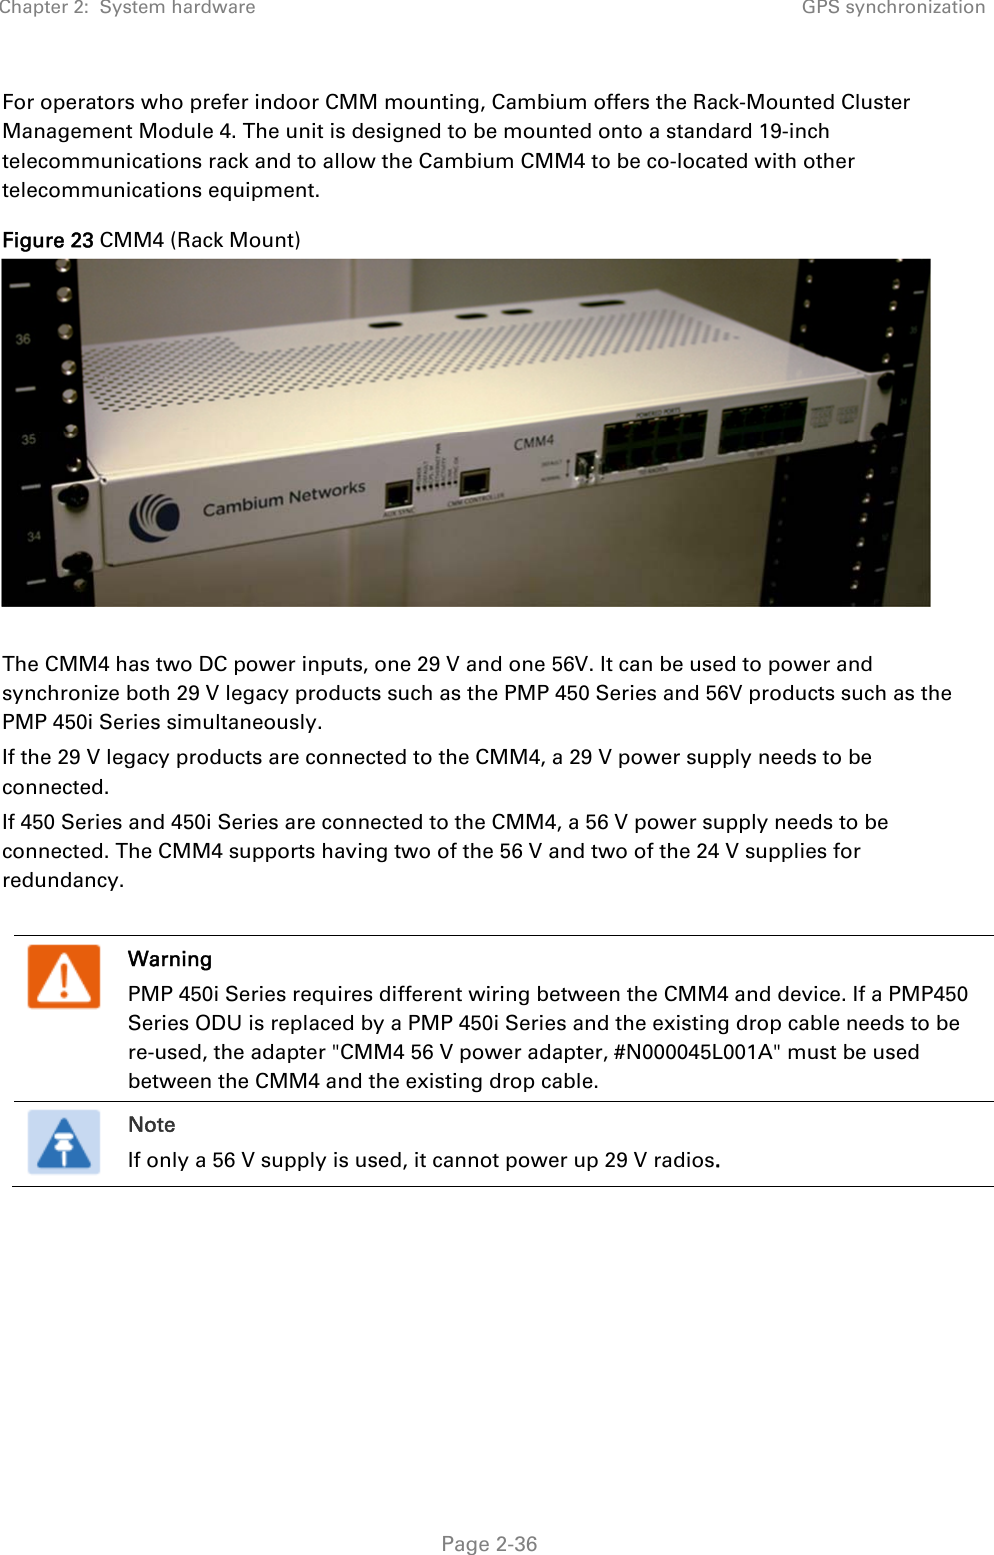 Chapter 2:  System hardware  GPS synchronization   Page 2-36 For operators who prefer indoor CMM mounting, Cambium offers the Rack-Mounted Cluster Management Module 4. The unit is designed to be mounted onto a standard 19-inch telecommunications rack and to allow the Cambium CMM4 to be co-located with other telecommunications equipment. Figure 23 CMM4 (Rack Mount)   The CMM4 has two DC power inputs, one 29 V and one 56V. It can be used to power and synchronize both 29 V legacy products such as the PMP 450 Series and 56V products such as the PMP 450i Series simultaneously. If the 29 V legacy products are connected to the CMM4, a 29 V power supply needs to be connected.  If 450 Series and 450i Series are connected to the CMM4, a 56 V power supply needs to be connected. The CMM4 supports having two of the 56 V and two of the 24 V supplies for redundancy.   Warning PMP 450i Series requires different wiring between the CMM4 and device. If a PMP450 Series ODU is replaced by a PMP 450i Series and the existing drop cable needs to be re-used, the adapter &quot;CMM4 56 V power adapter, #N000045L001A&quot; must be used between the CMM4 and the existing drop cable.  Note If only a 56 V supply is used, it cannot power up 29 V radios. 